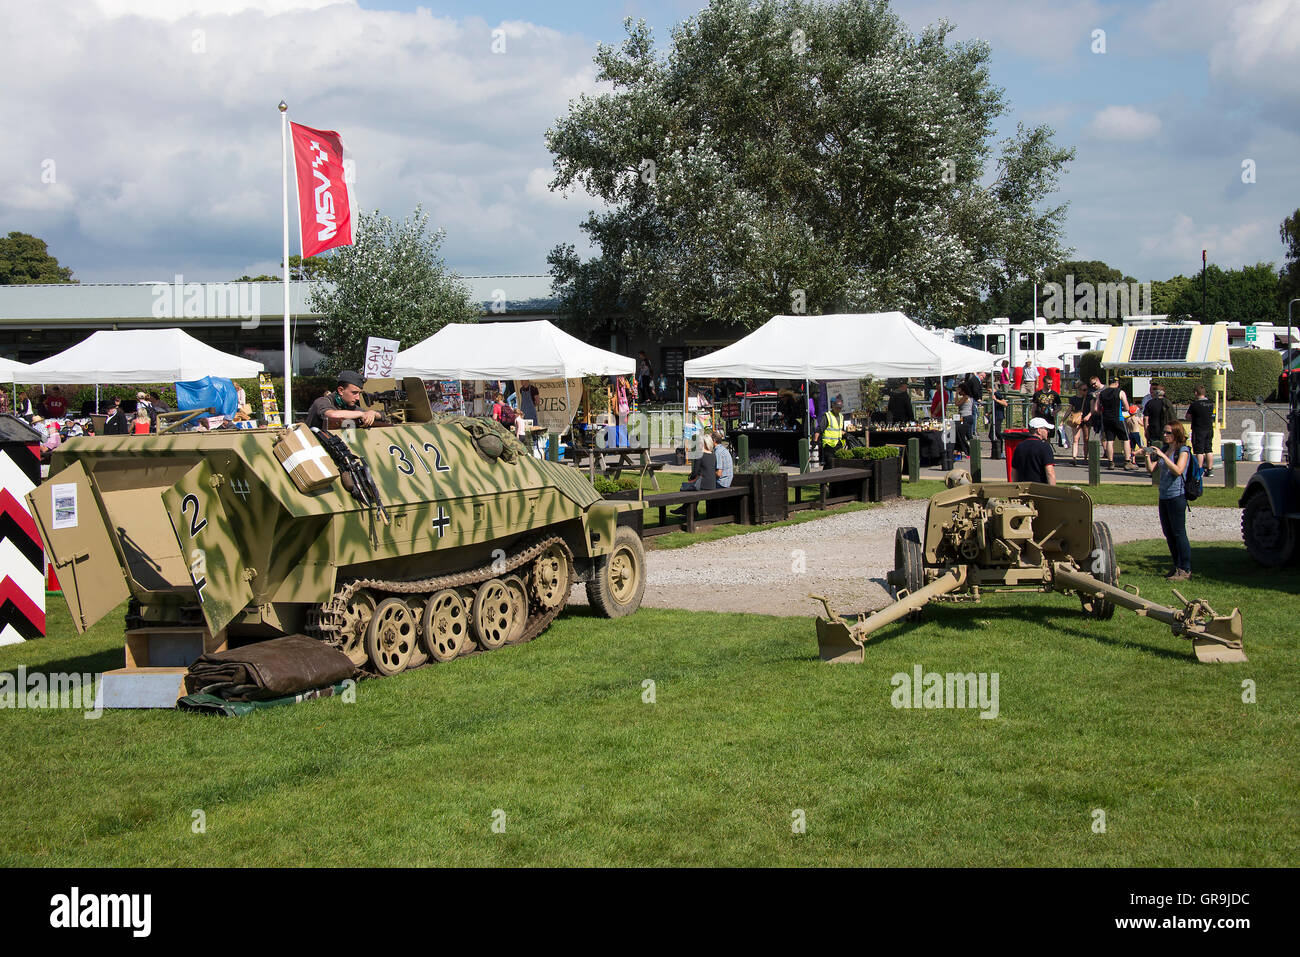 A World War Two German Half-Track Armoured Vehicle and Field Gun at Oulton Park Gold Cup Race Meeting near Tarporley Cheshire England United Kingdom Stock Photo